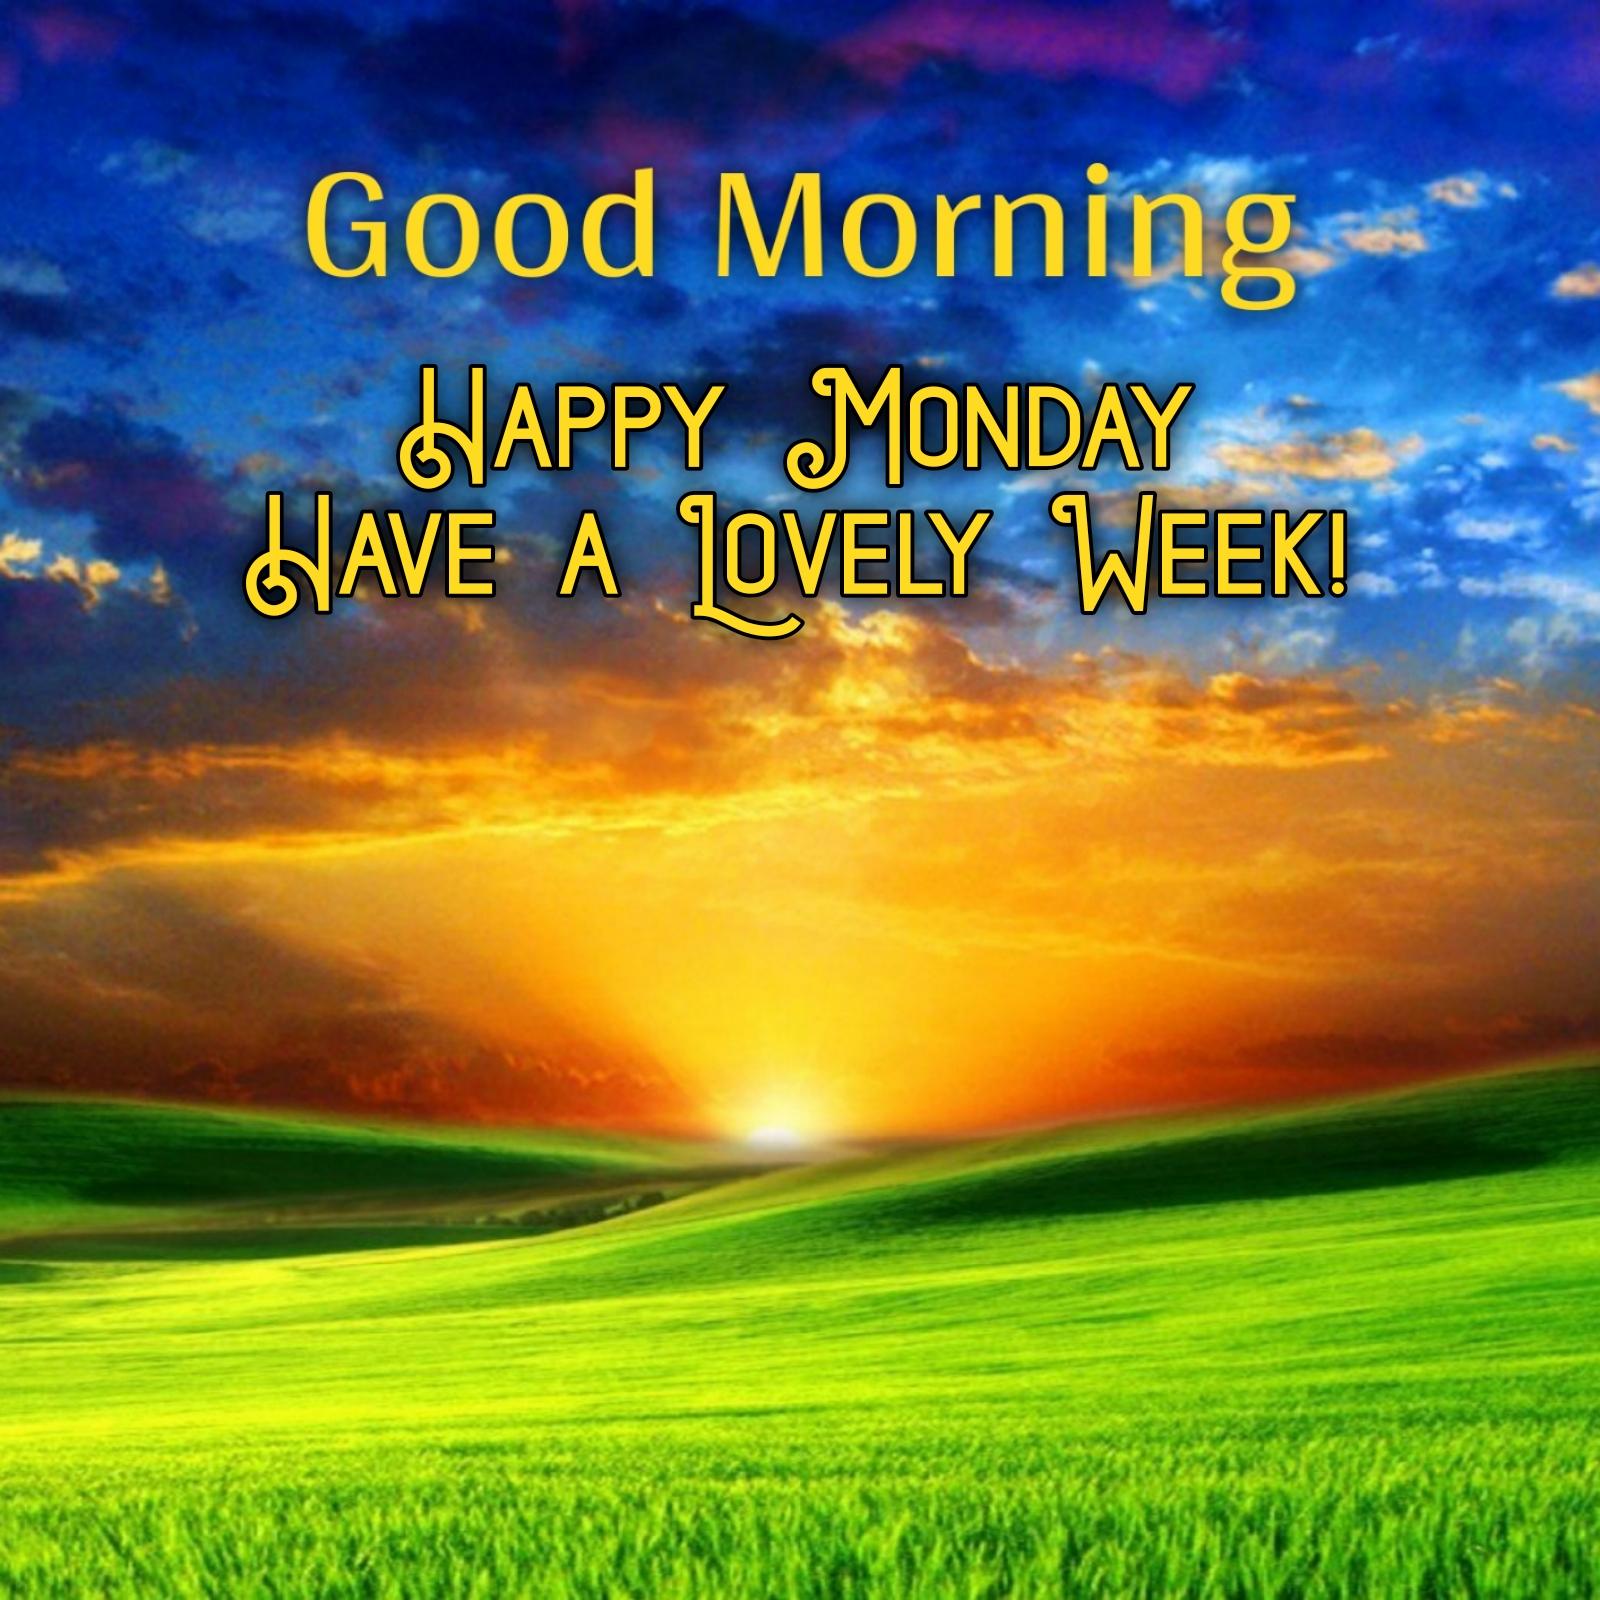 Good Morning Happy Monday Have a Lovely Week Images